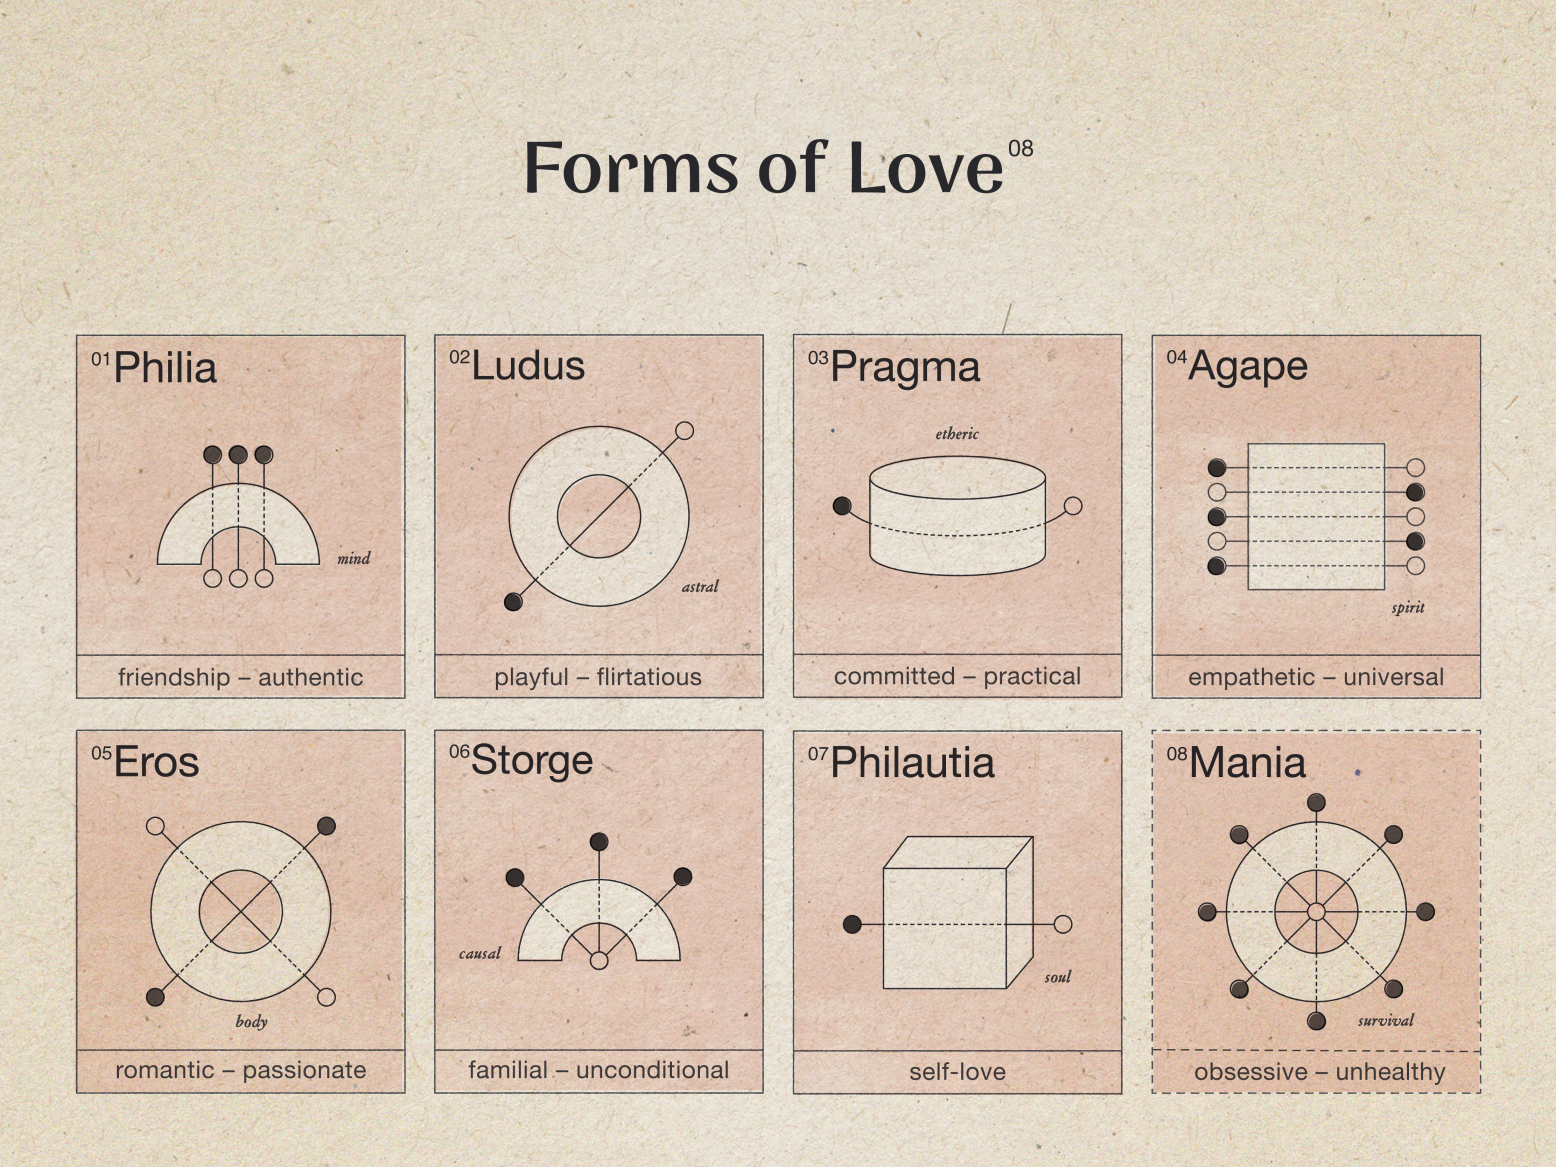 Forms of Love by taylor roy on Dribbble